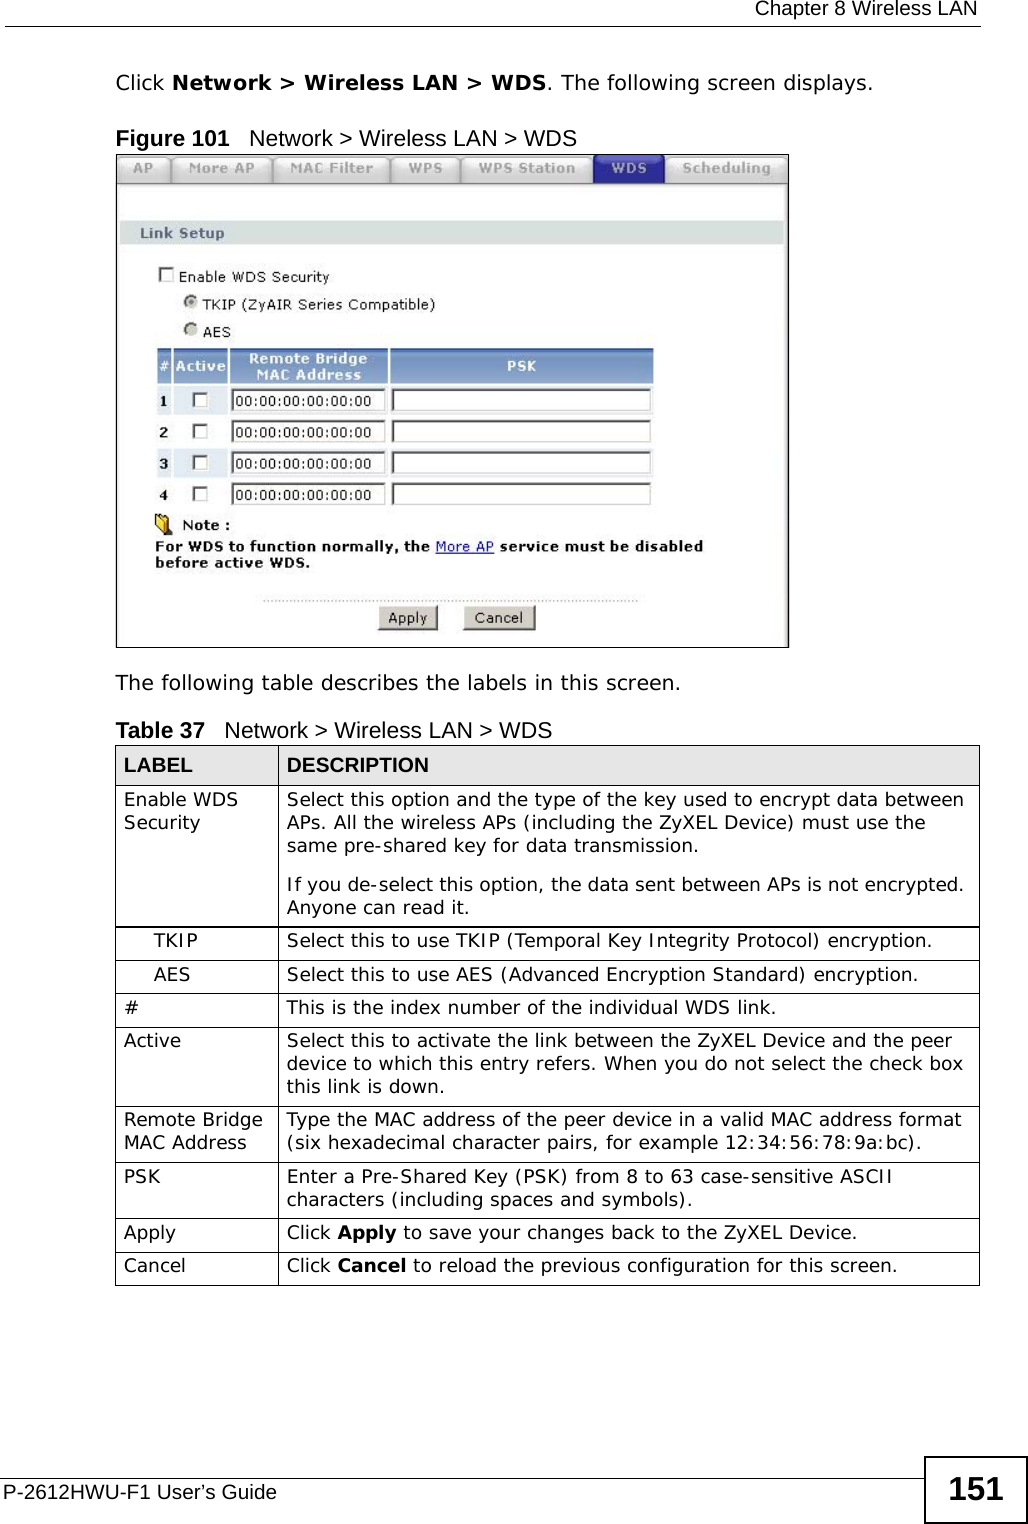  Chapter 8 Wireless LANP-2612HWU-F1 User’s Guide 151Click Network &gt; Wireless LAN &gt; WDS. The following screen displays.Figure 101   Network &gt; Wireless LAN &gt; WDSThe following table describes the labels in this screen.Table 37   Network &gt; Wireless LAN &gt; WDSLABEL DESCRIPTIONEnable WDS Security Select this option and the type of the key used to encrypt data between APs. All the wireless APs (including the ZyXEL Device) must use the same pre-shared key for data transmission.If you de-select this option, the data sent between APs is not encrypted. Anyone can read it.TKIP Select this to use TKIP (Temporal Key Integrity Protocol) encryption.AES Select this to use AES (Advanced Encryption Standard) encryption. # This is the index number of the individual WDS link.Active Select this to activate the link between the ZyXEL Device and the peer device to which this entry refers. When you do not select the check box this link is down.Remote Bridge MAC Address Type the MAC address of the peer device in a valid MAC address format (six hexadecimal character pairs, for example 12:34:56:78:9a:bc).PSK Enter a Pre-Shared Key (PSK) from 8 to 63 case-sensitive ASCII characters (including spaces and symbols).Apply Click Apply to save your changes back to the ZyXEL Device.Cancel Click Cancel to reload the previous configuration for this screen.